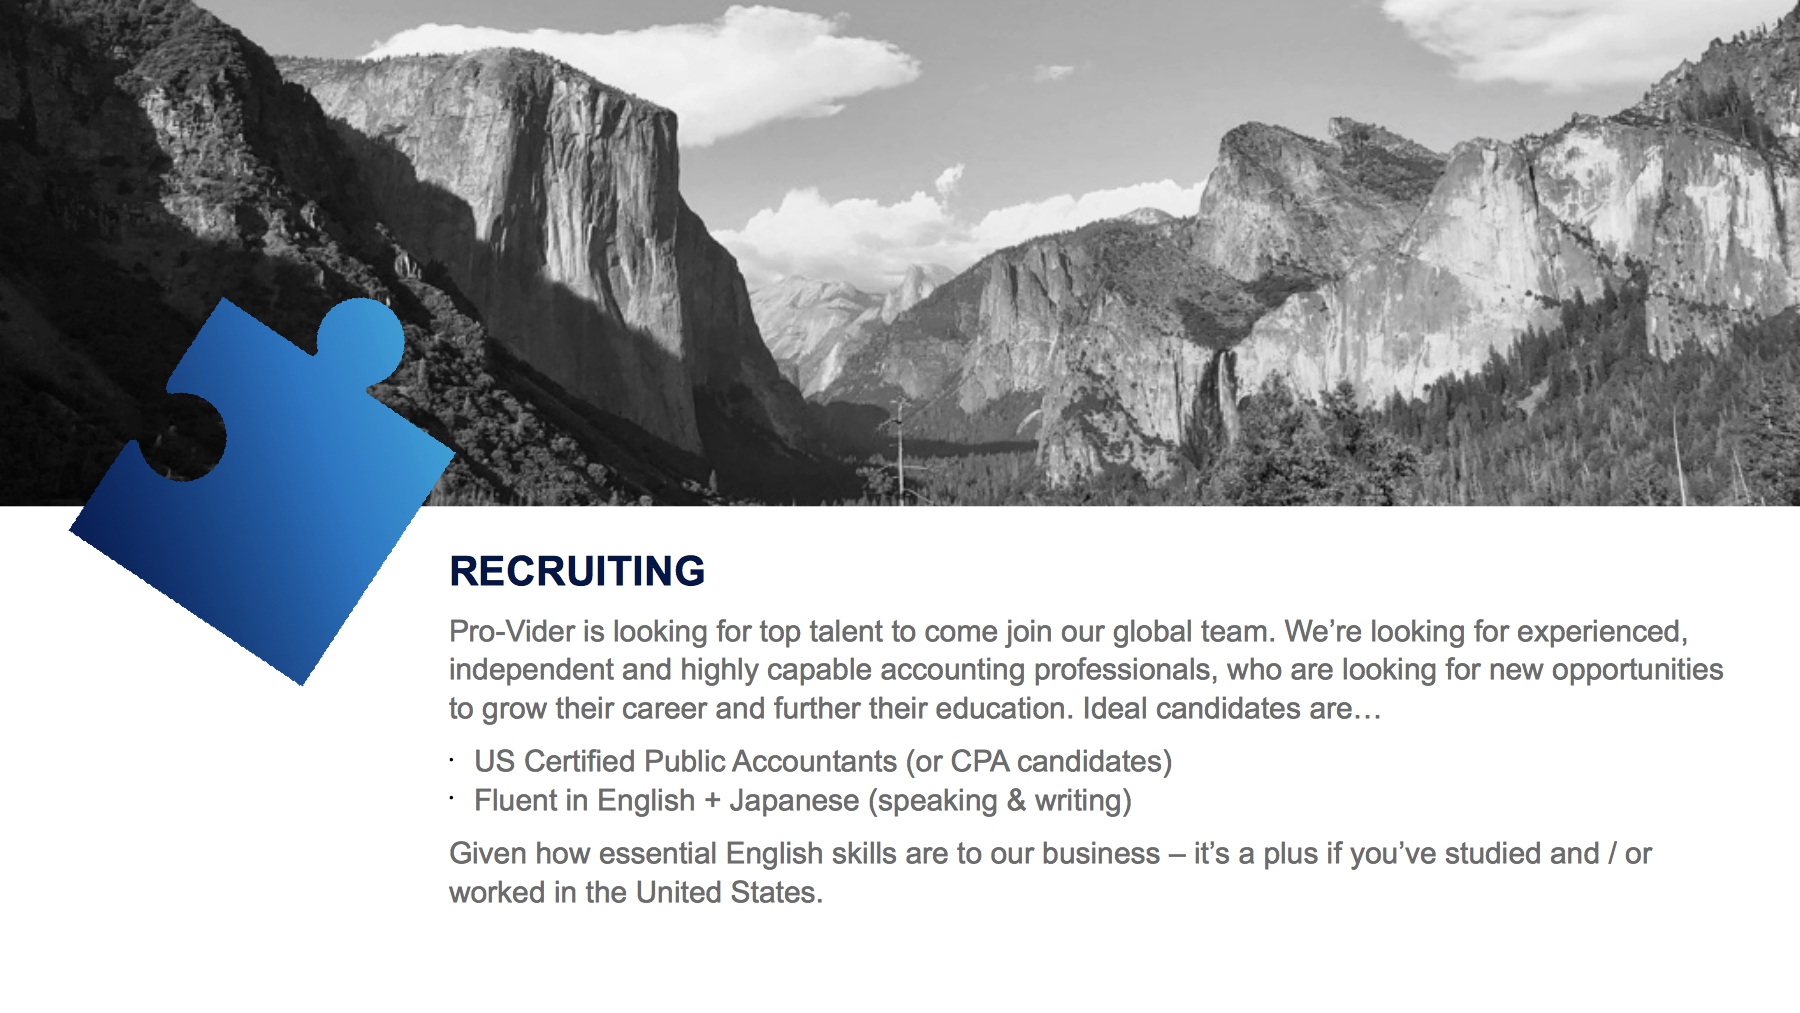 COME WORK WITH US-RECRUITING-Pro-Vider is looking for top talent to come join our global team. We’re looking for experienced, independent and highly capable accounting professionals, who are looking for new opportunities to grow their career and further their education. Ideal candidates are…US Certified Public Accountants (or CPA candidates)Fluent in English + Japanese (speaking & writing) Given how essential English skills are to our business – it’s a plus if you’ve studied and / or worked in the United States.